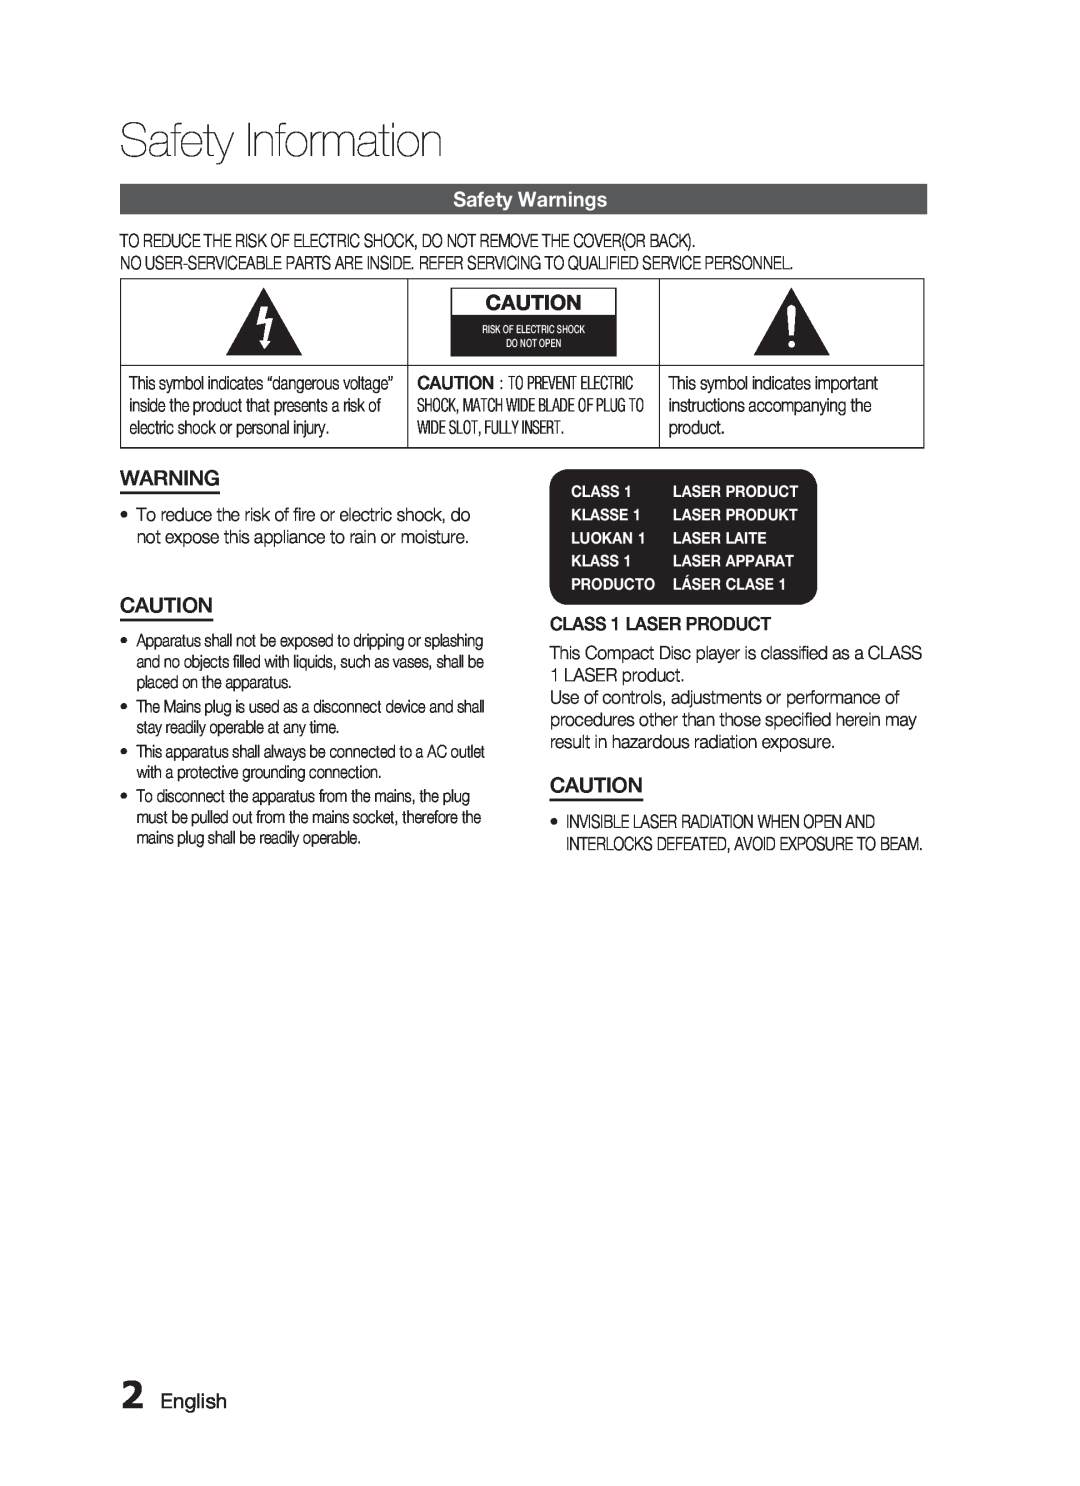 Samsung HT-C650W, HT-C555 Safety Information, Safety Warnings, Class, Klasse, Luokan, Laser Laite, Laser Apparat, Producto 